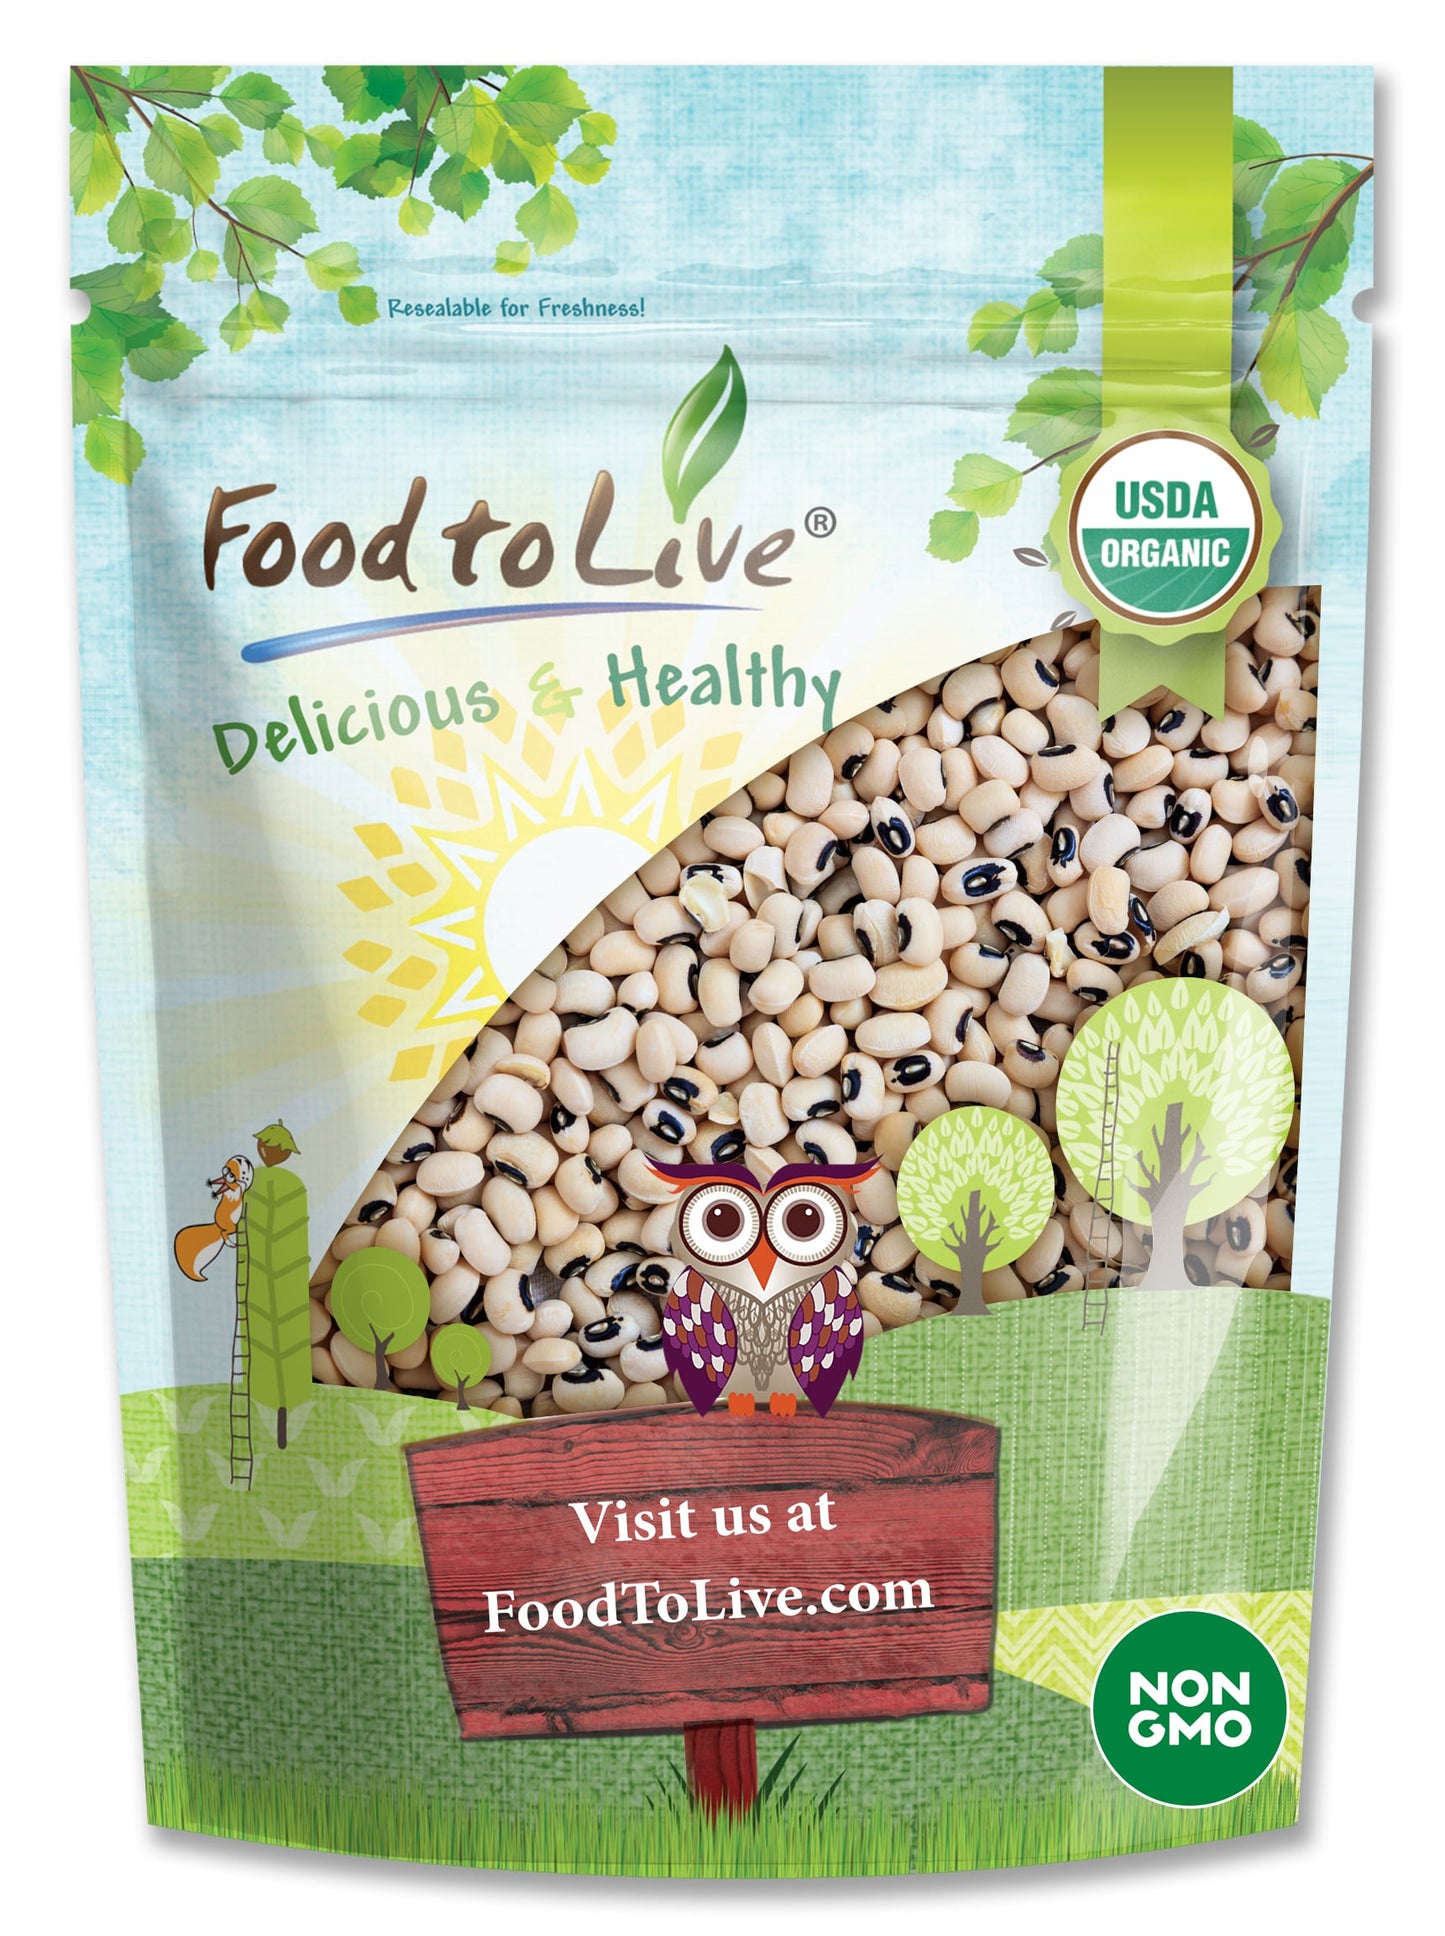 Organic Black-Eyed Peas - Raw Dried Cow Peas, Non-GMO, Kosher, Bulk Beans, Product of the USA - by Food to Live